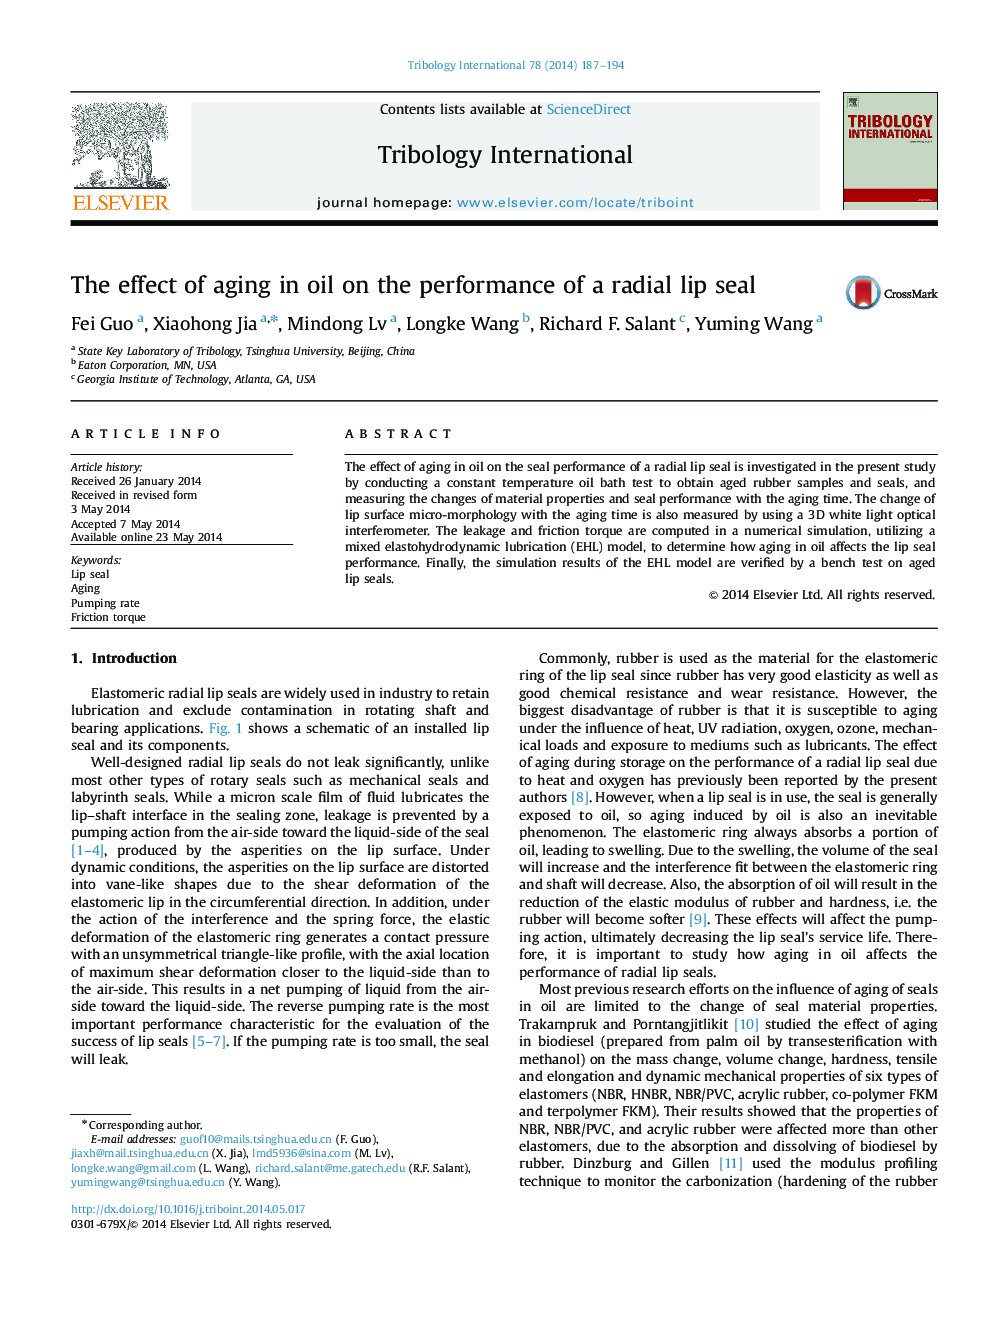 The effect of aging in oil on the performance of a radial lip seal